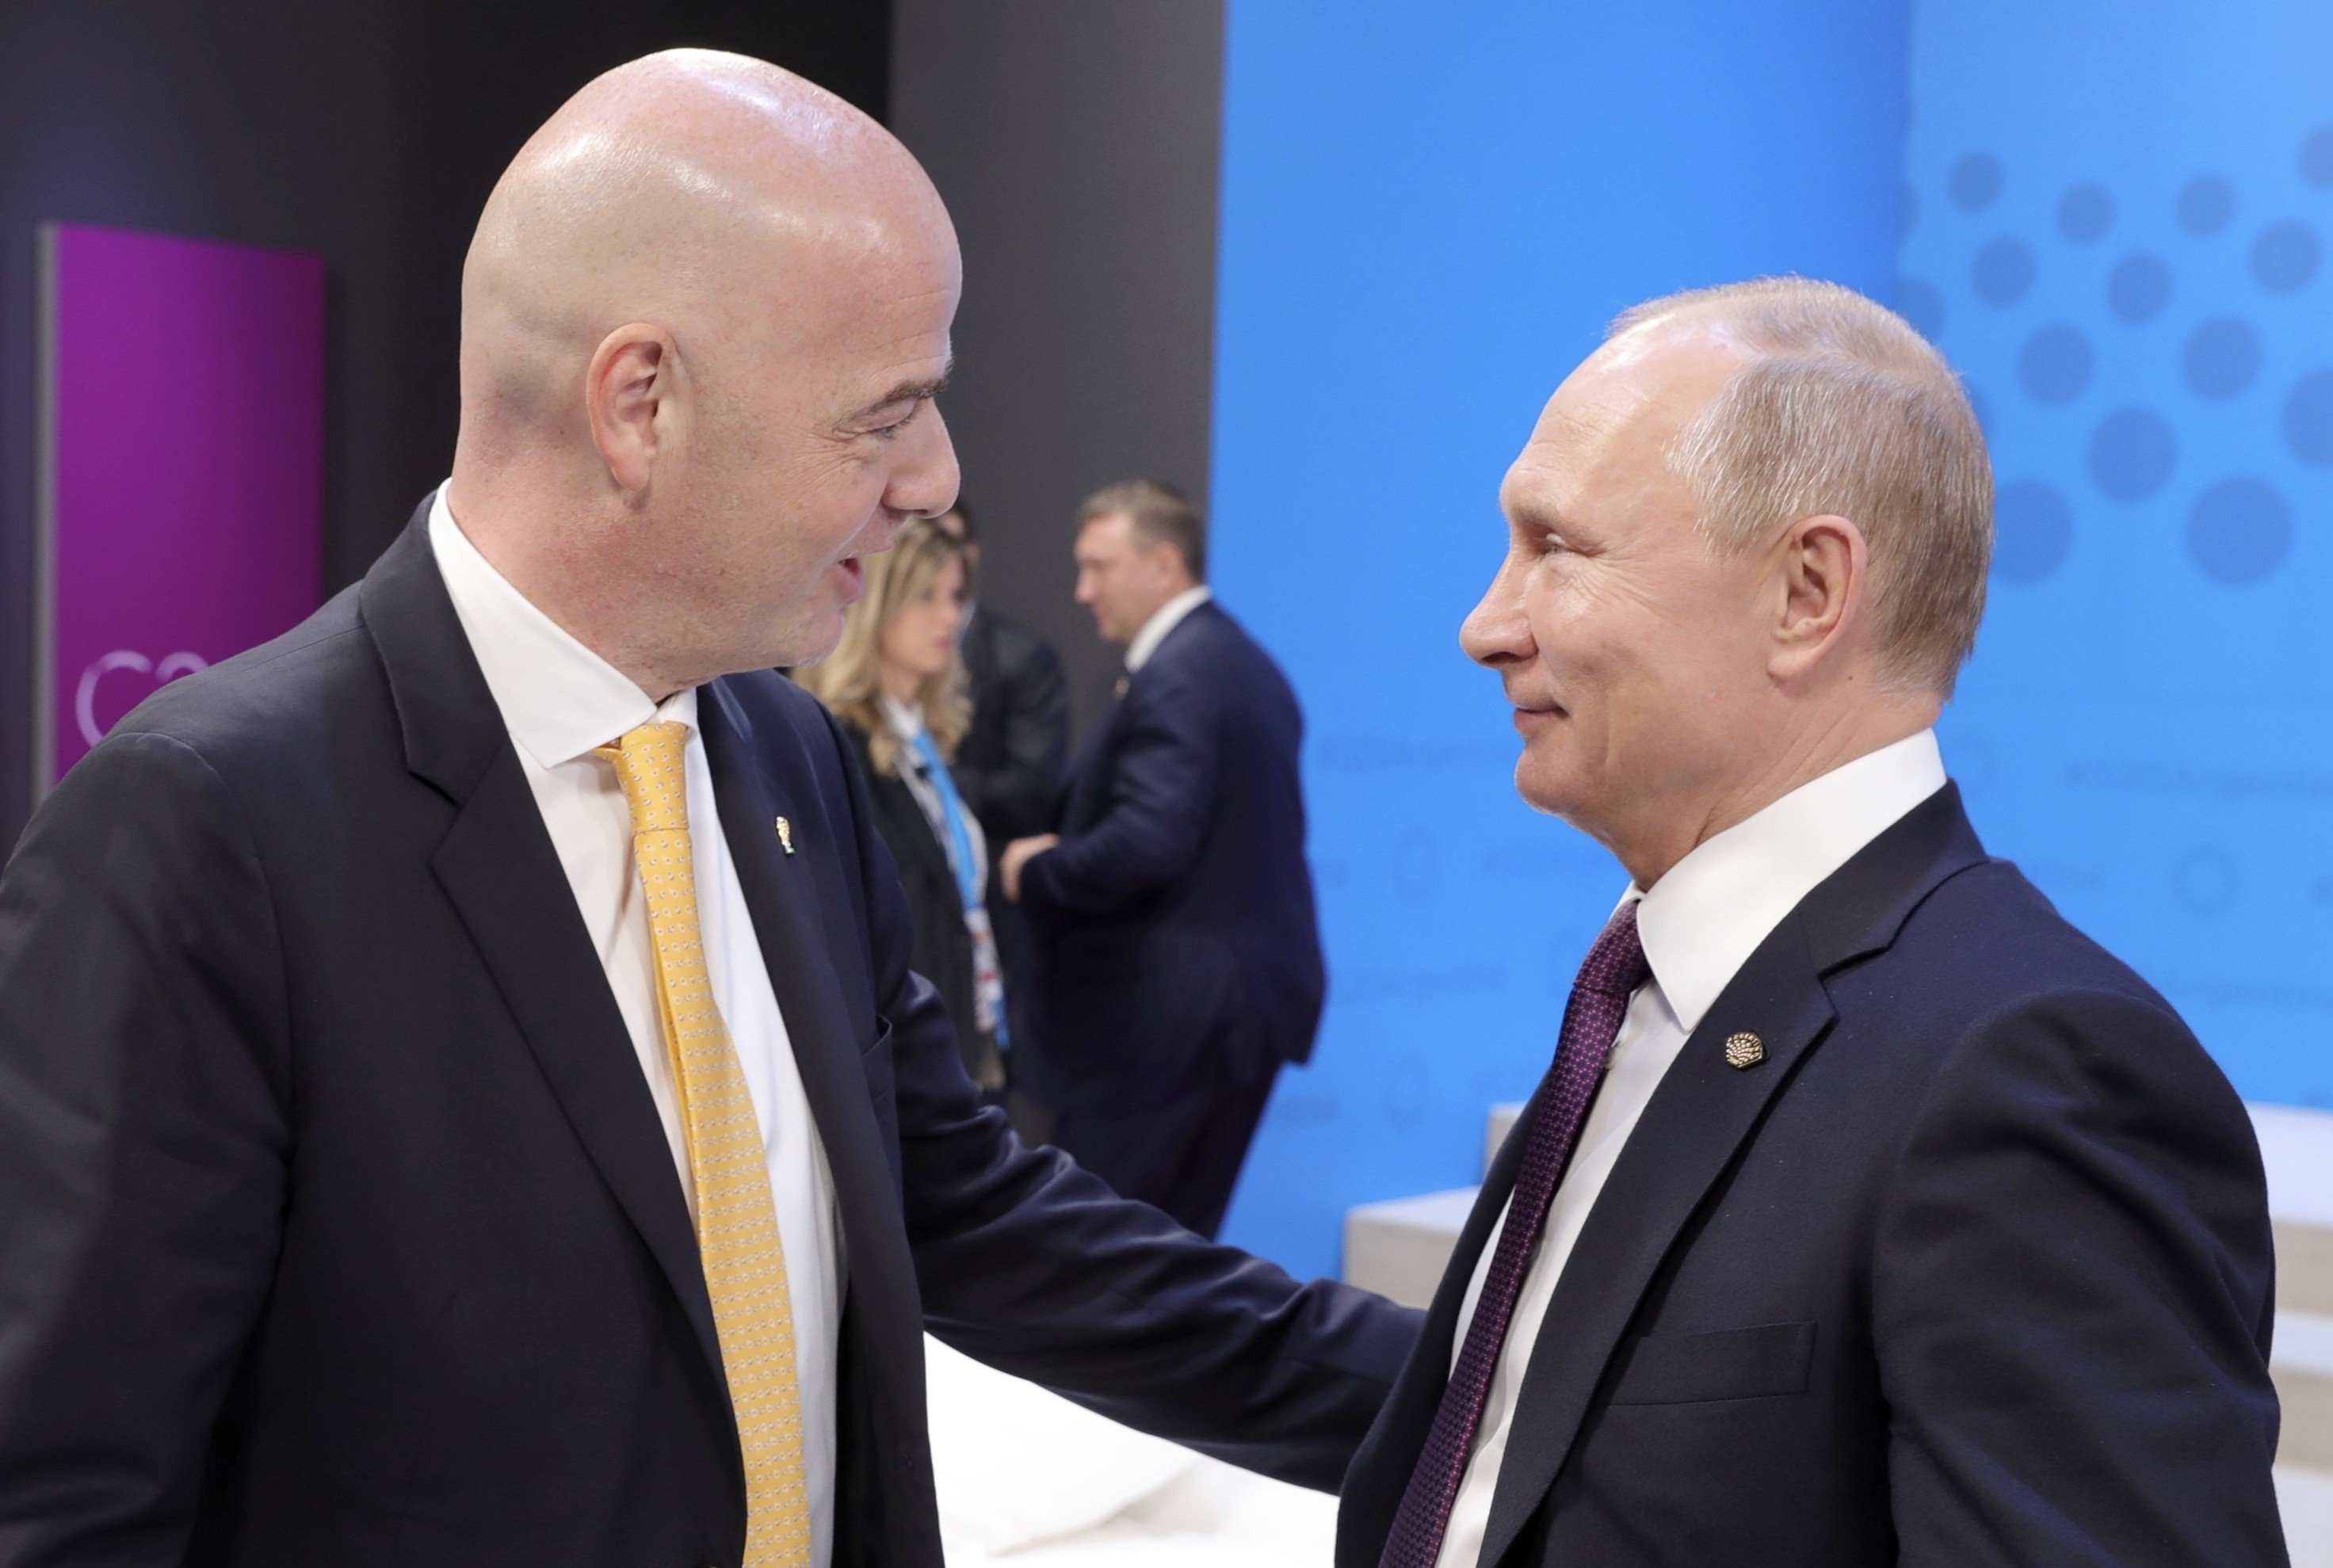 Fifa President Gianni Infantino with Russian President Vladimir Putin at the G20 summit in Buenos Aires, Argentina. Photo: AP